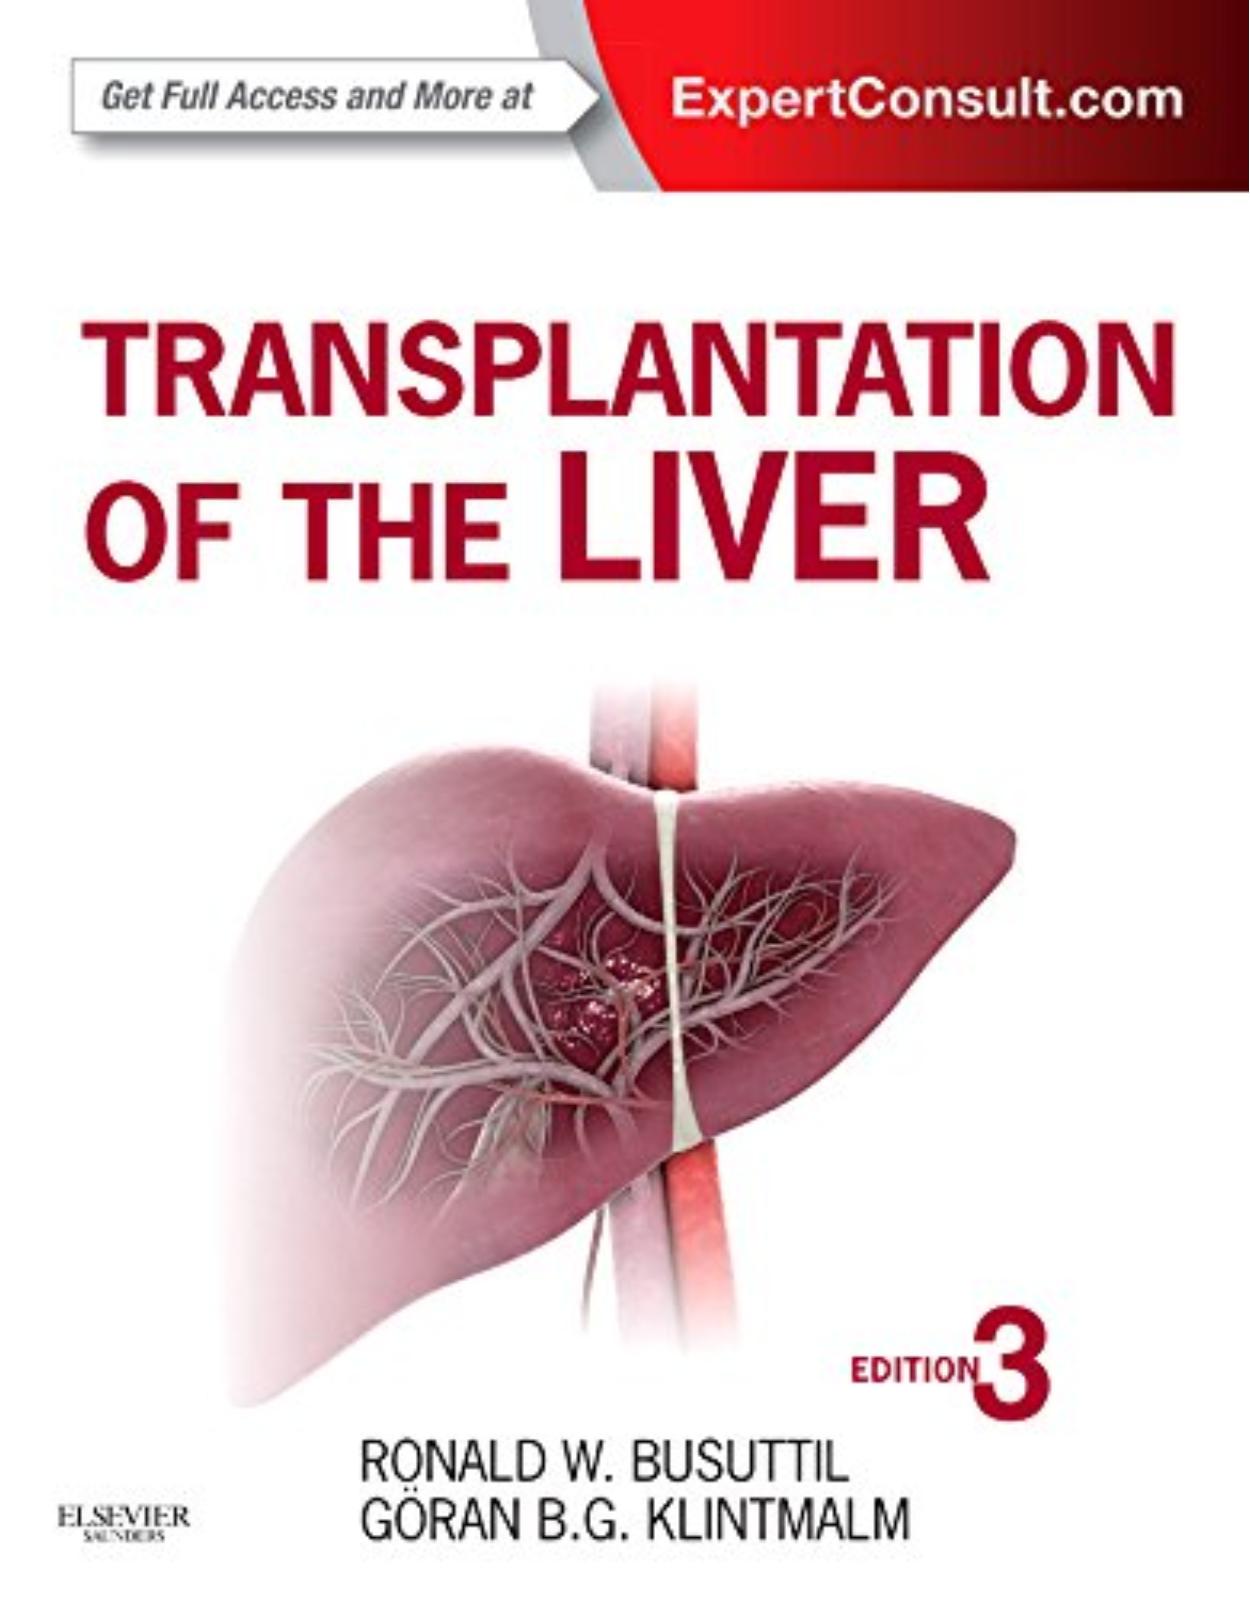 Transplantation of the Liver: Expert Consult - Online and Print, 3e